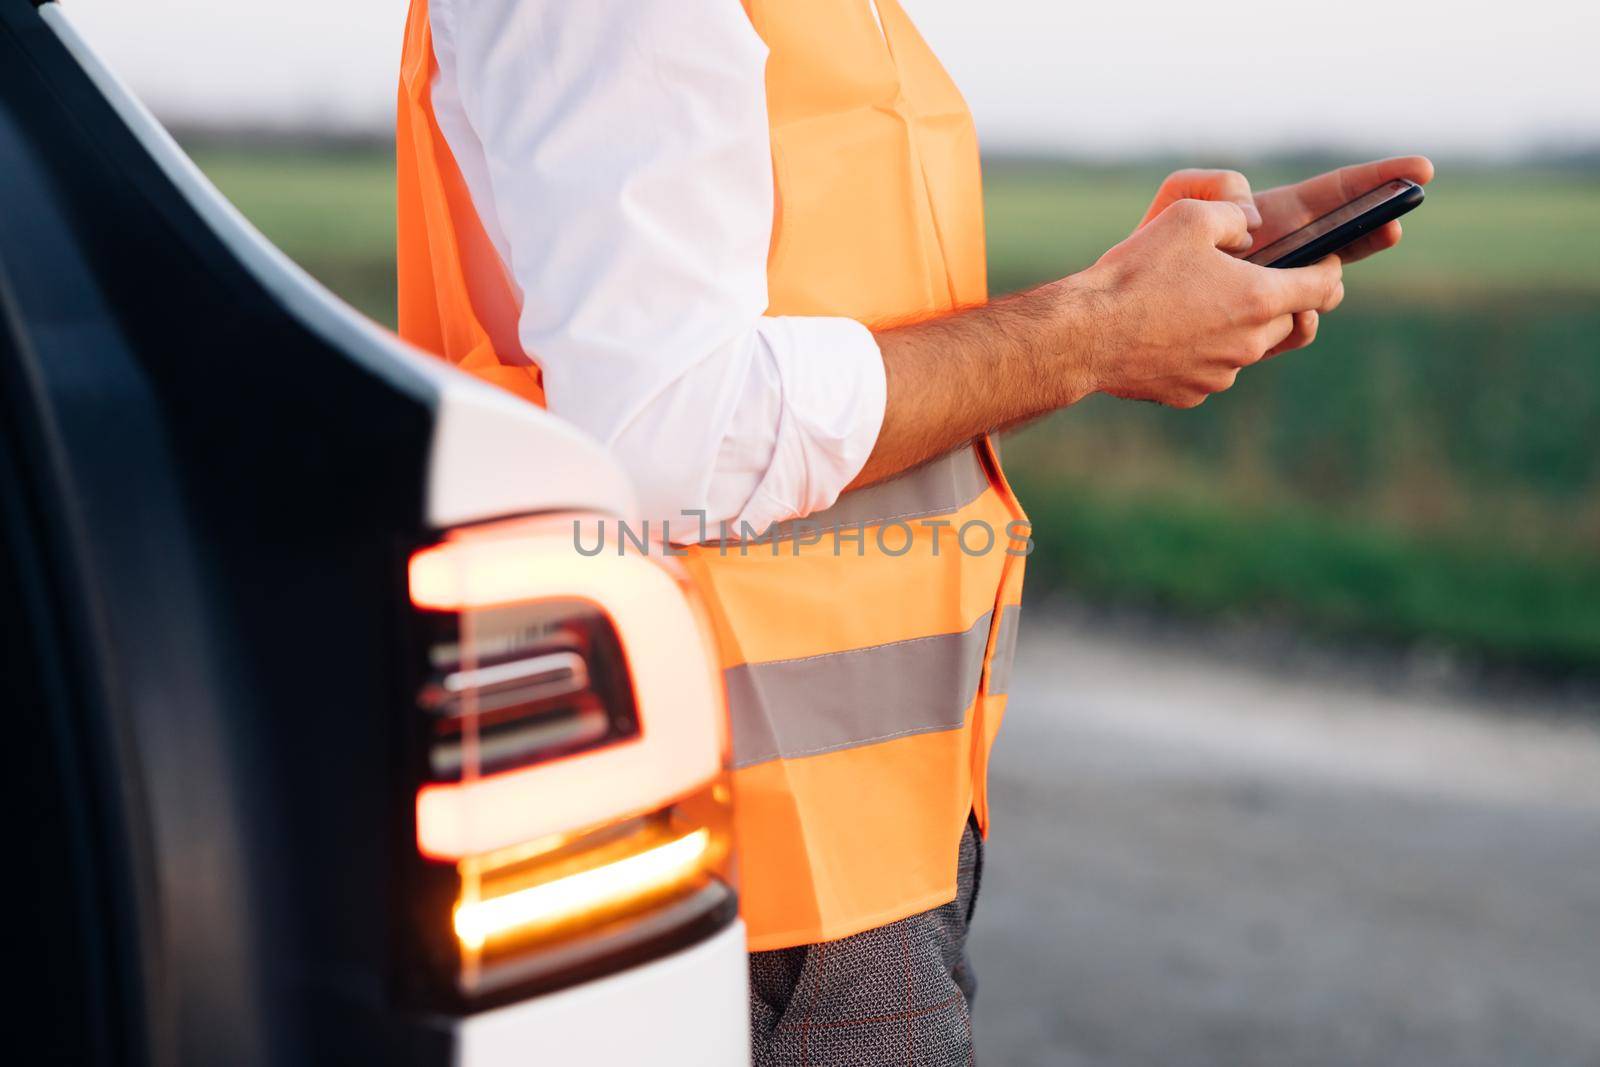 The man uses the phone after the electric car has broken down. Car Blinker Light or Emergency Light. The electric car had an accident. Car service by uflypro